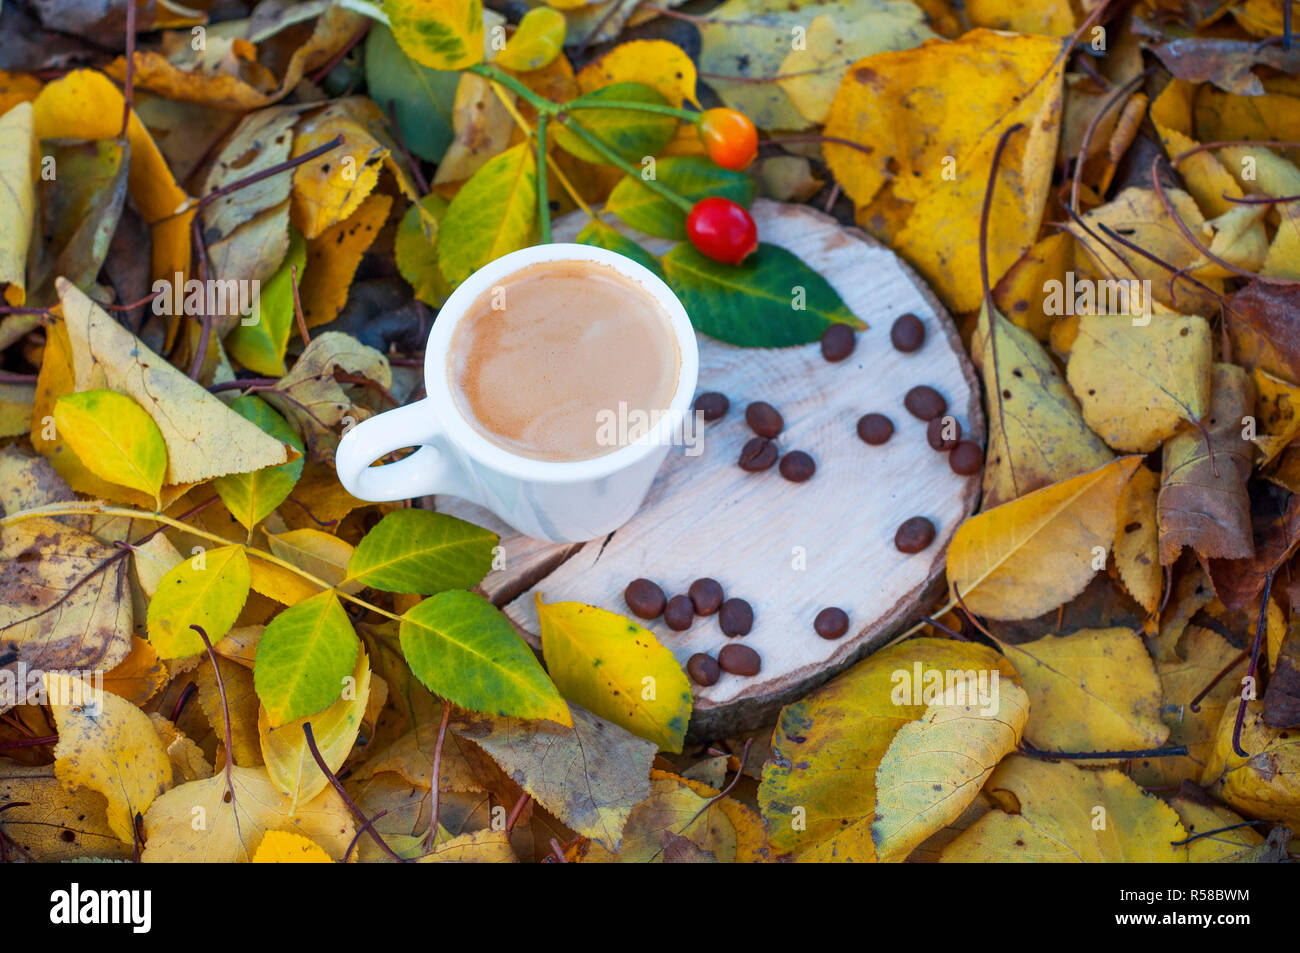 Espresso coffee in a white cup on a wooden stump Stock Photo